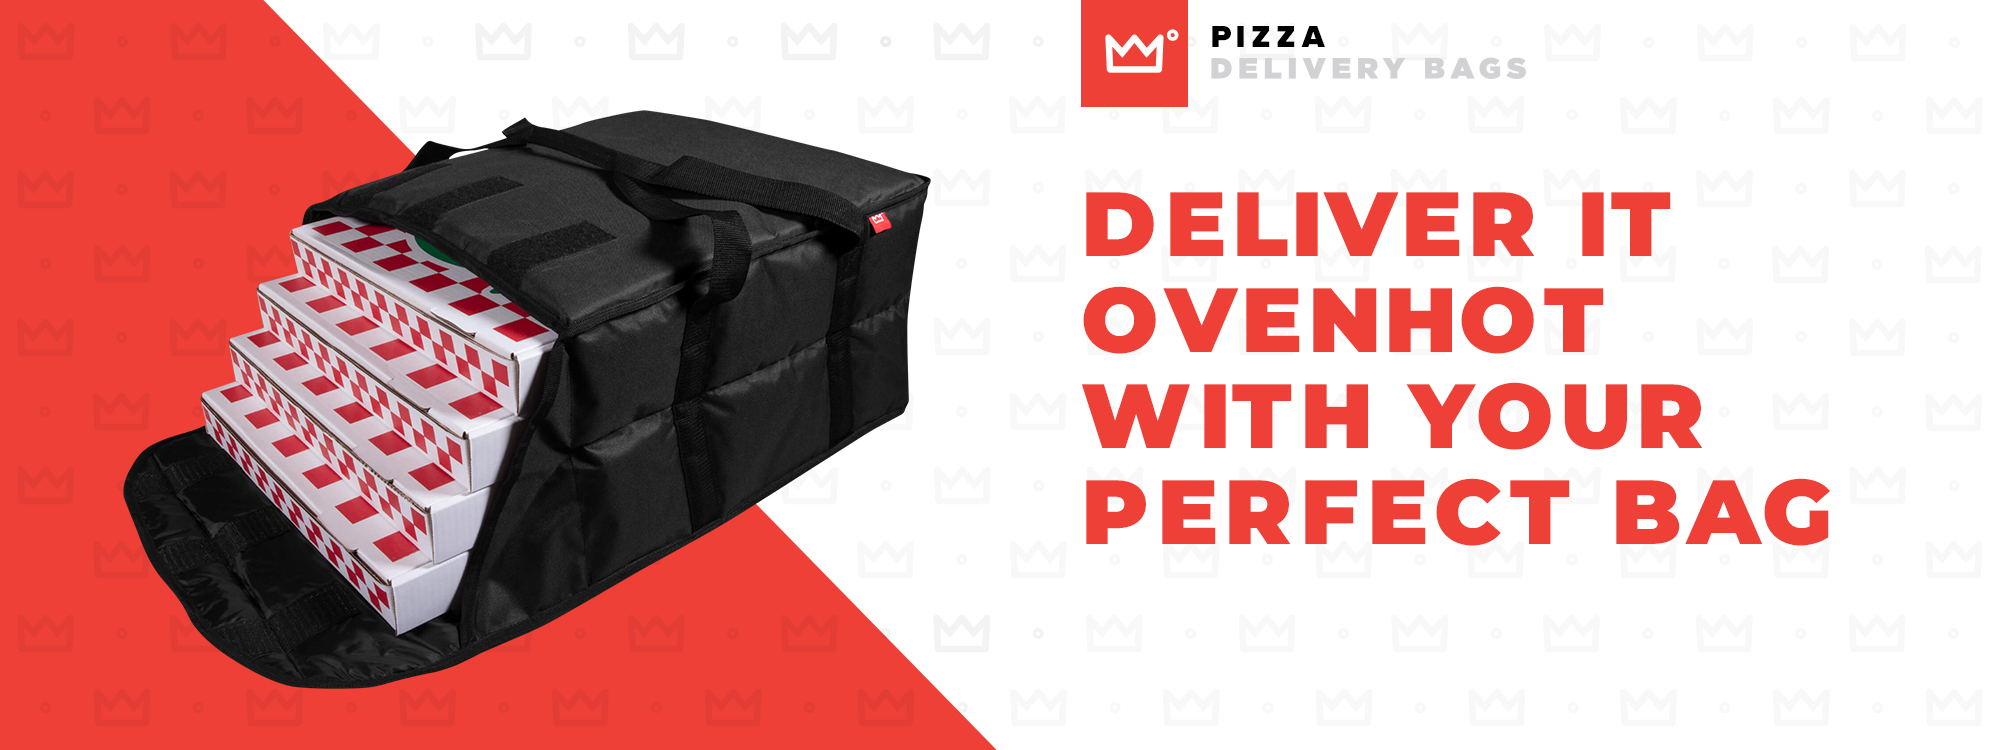 Pizza Delivery Bags - Incredible Bags